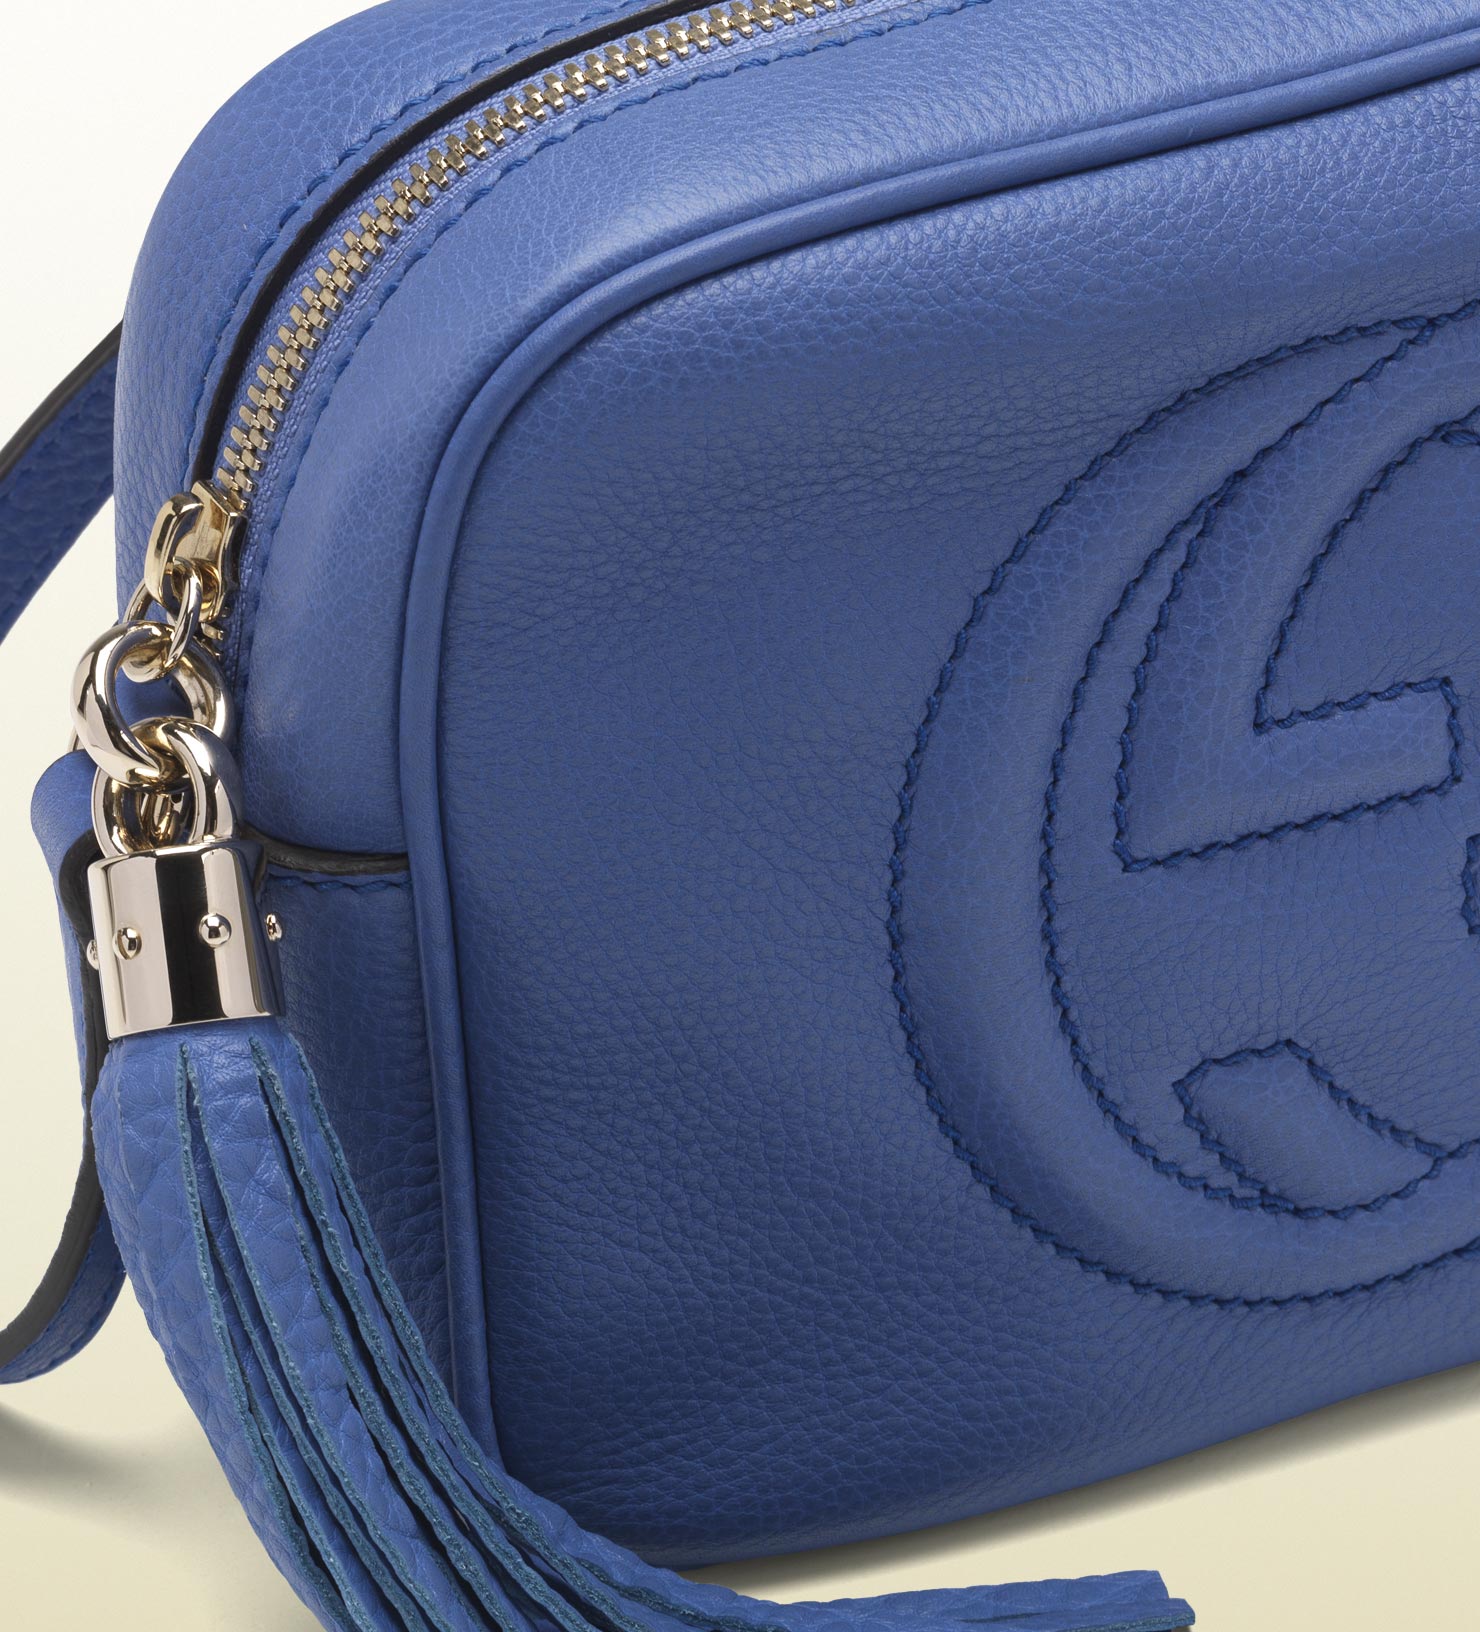 Gucci Soho Periwinkle Leather Disco Bag in Blue - Lyst